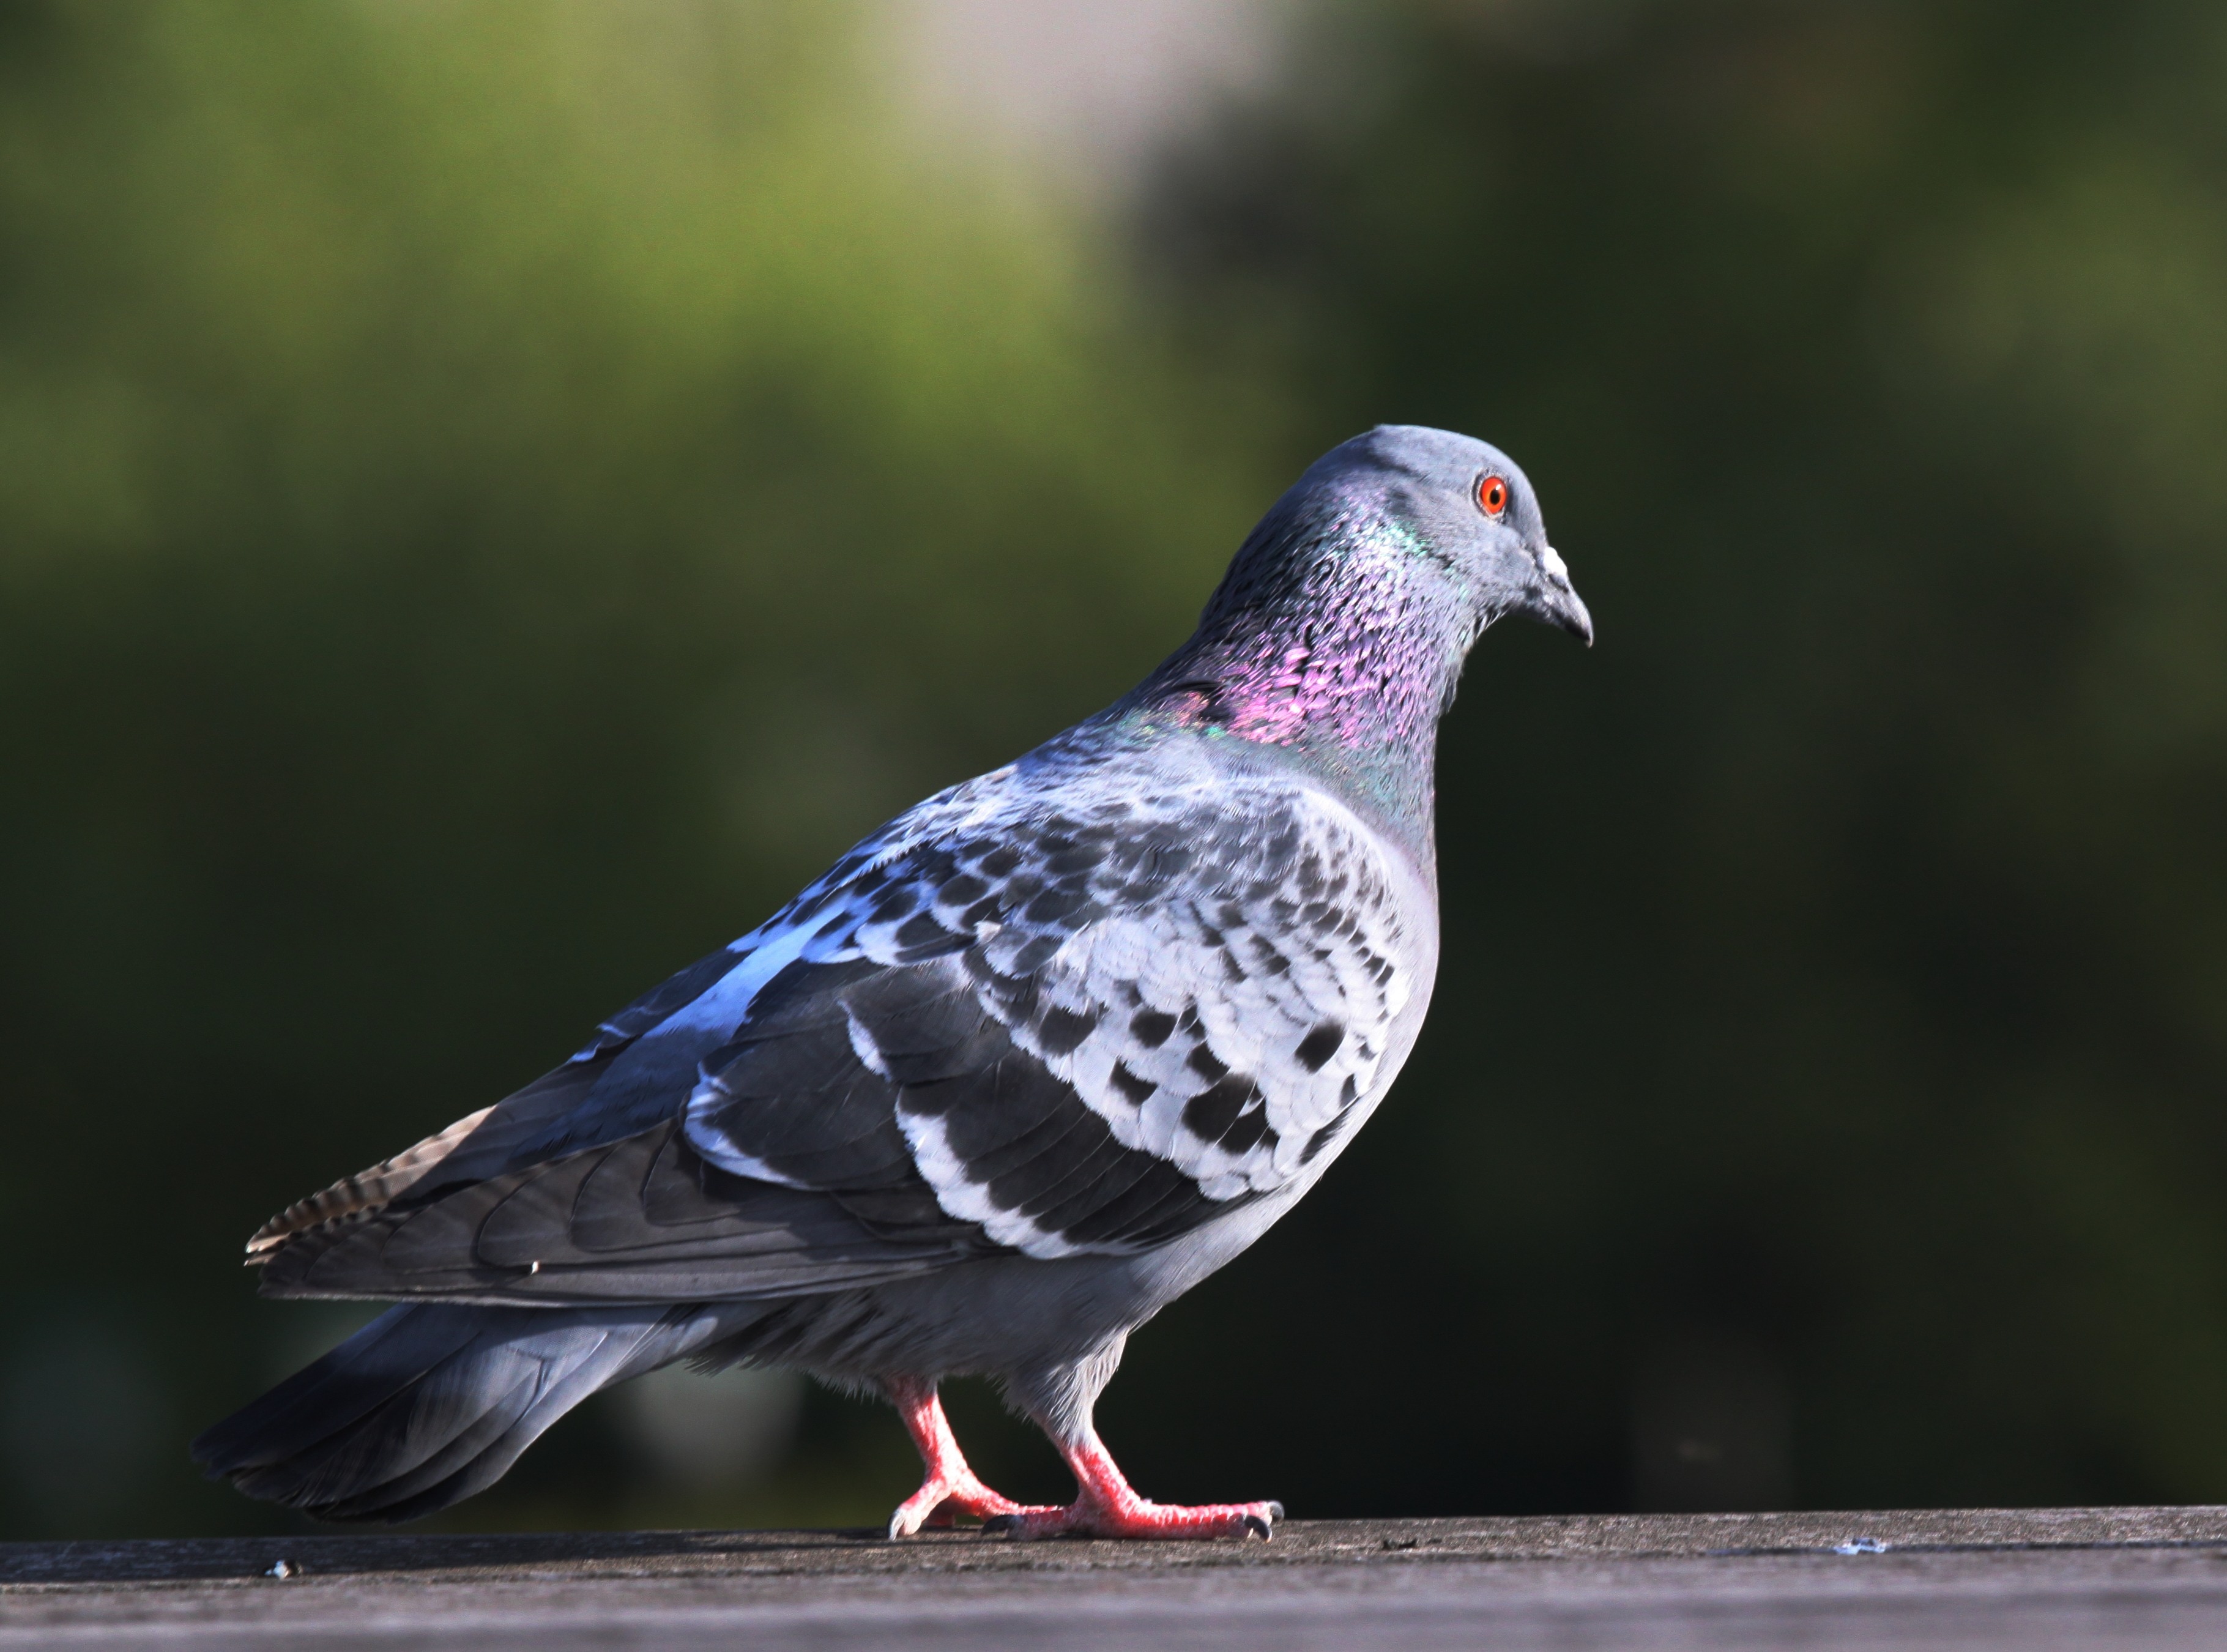 grey and white pigeon